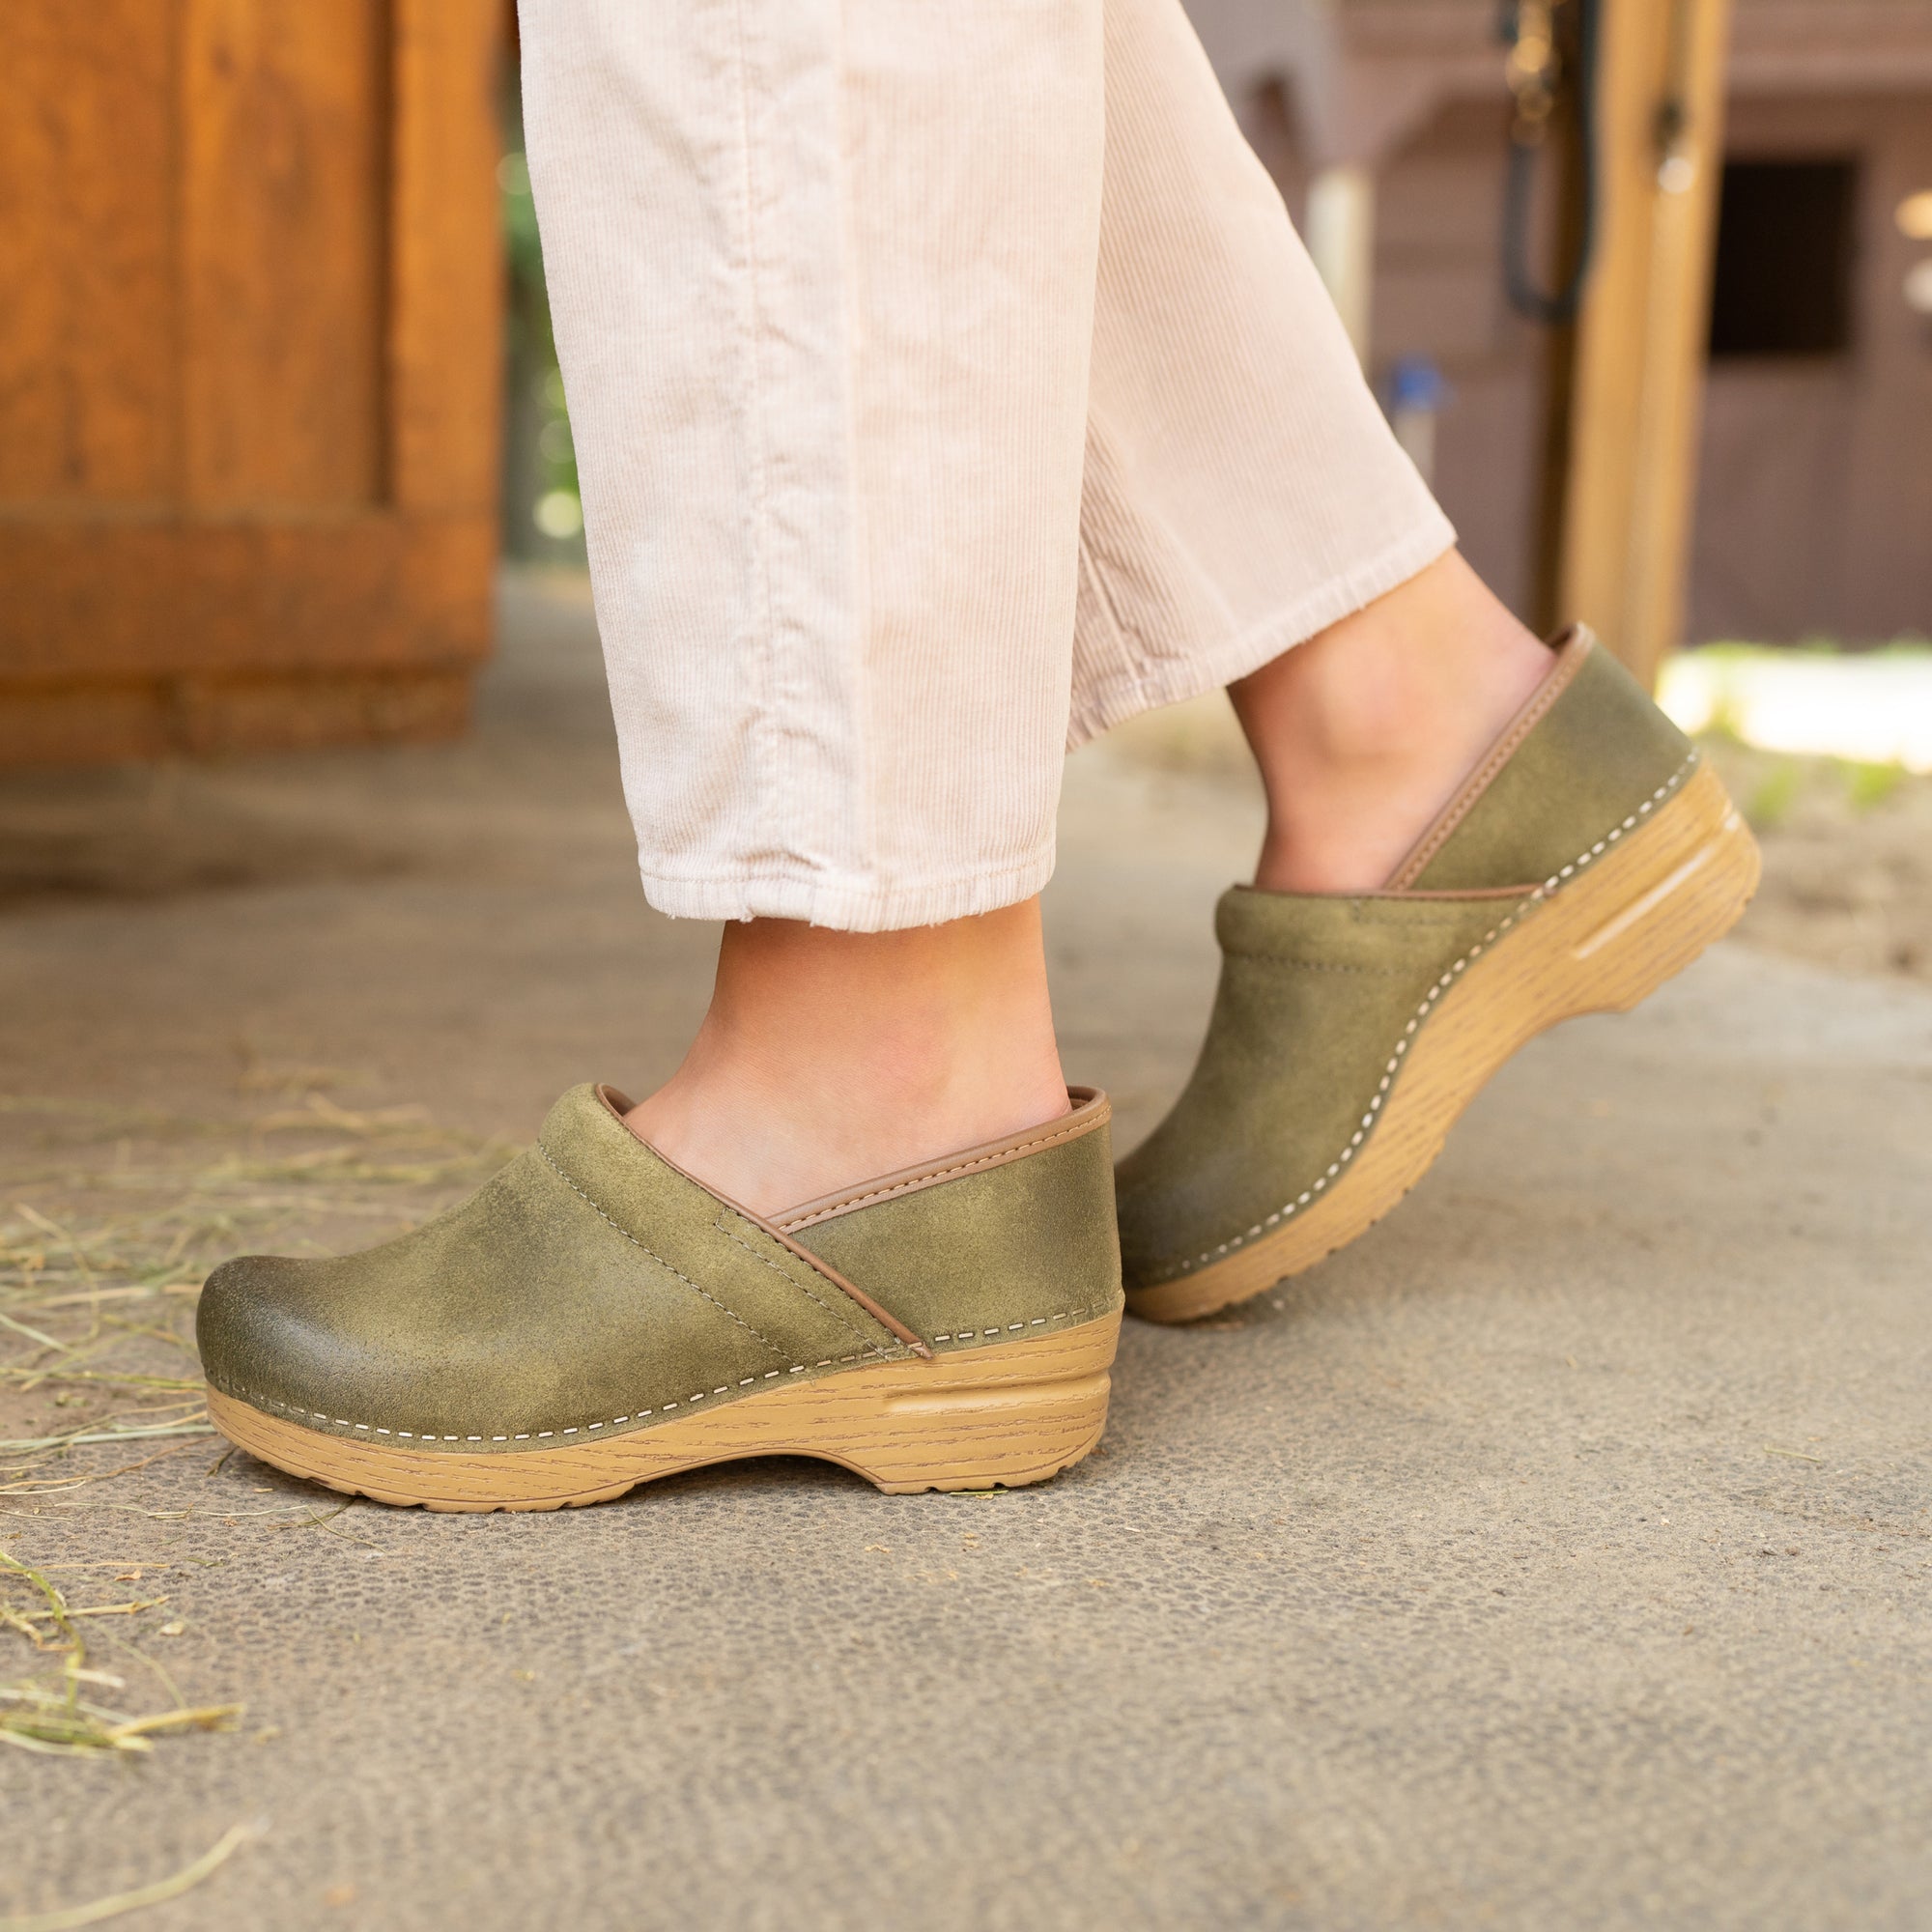 Green comfort clogs in a barn setting.